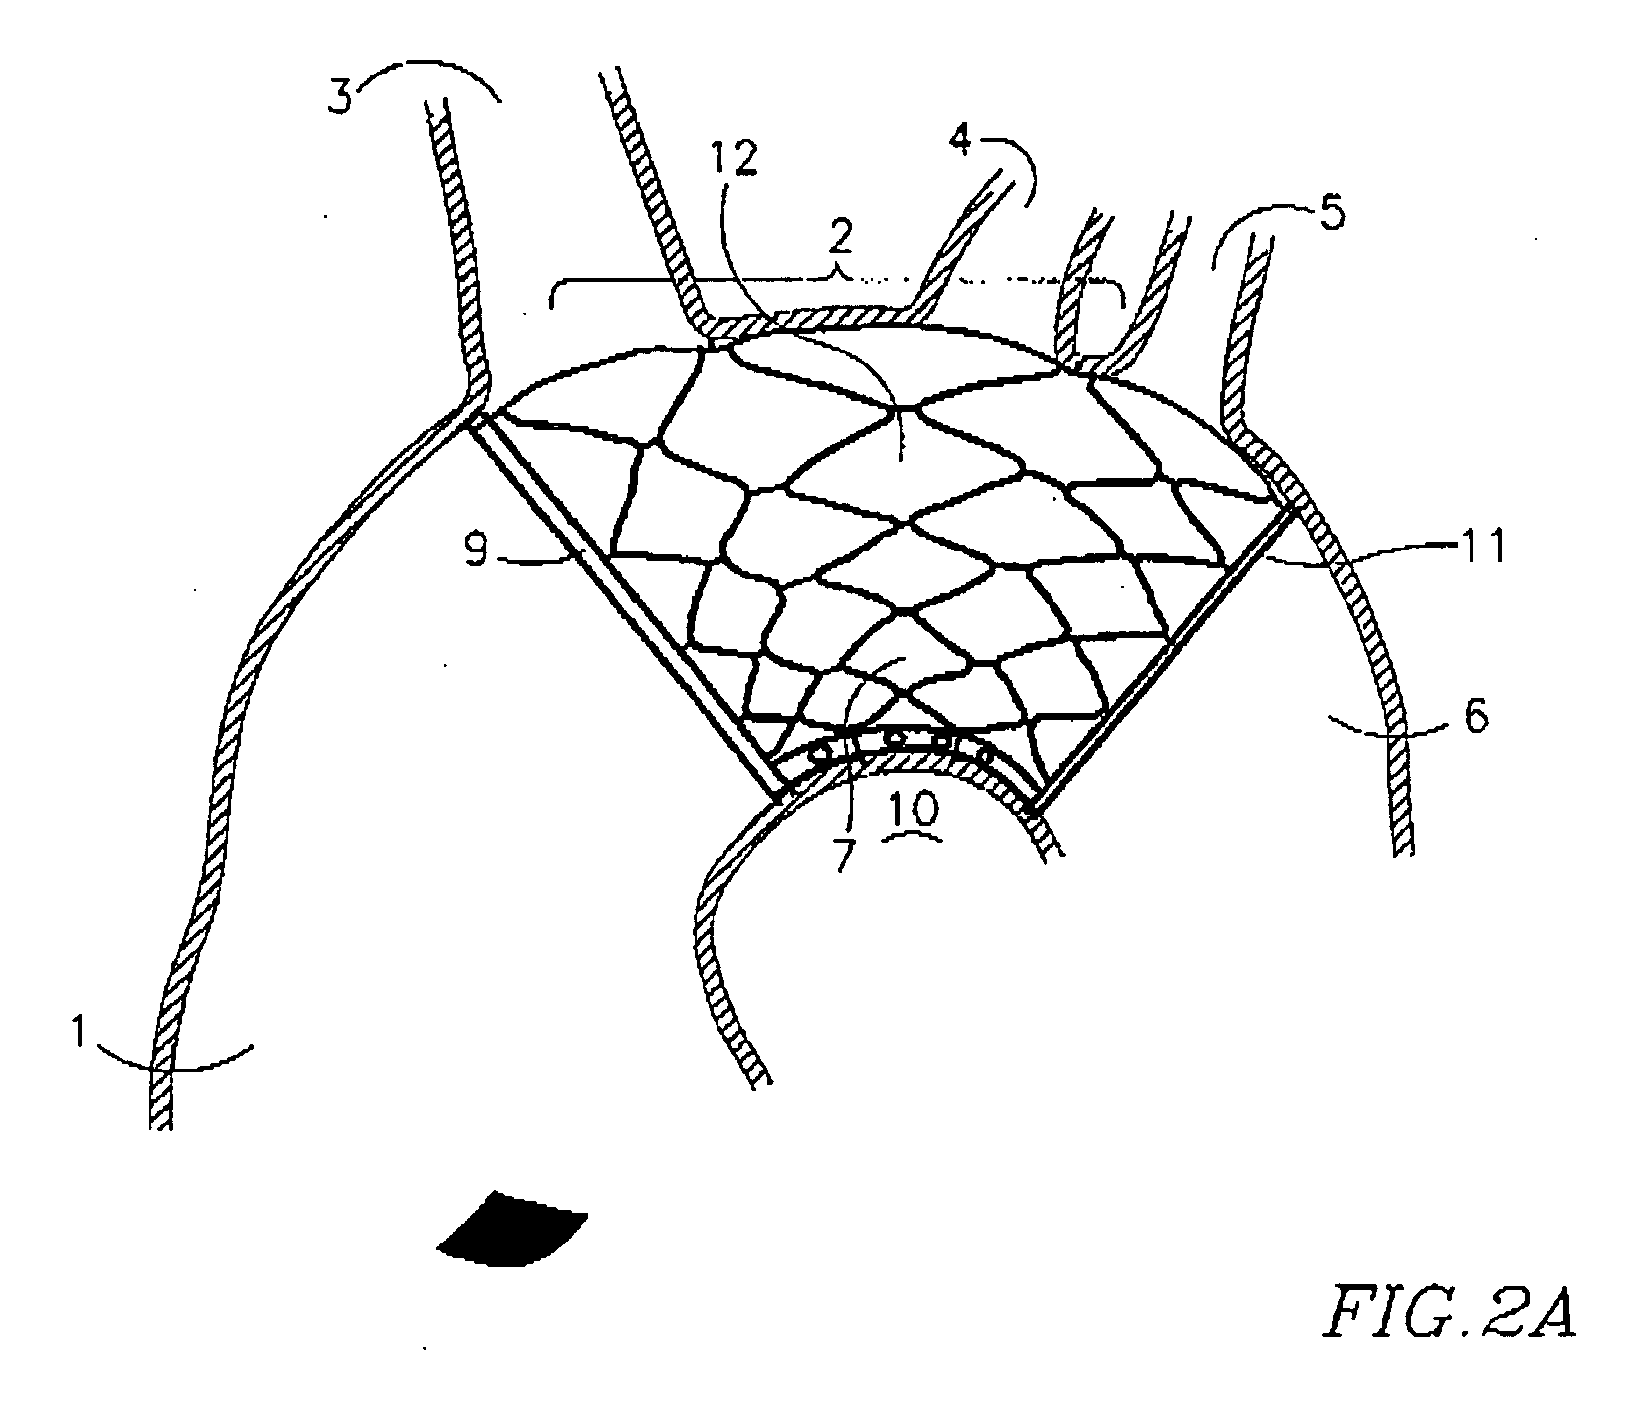 Endovascular device for entrapment of participate matter and method for use